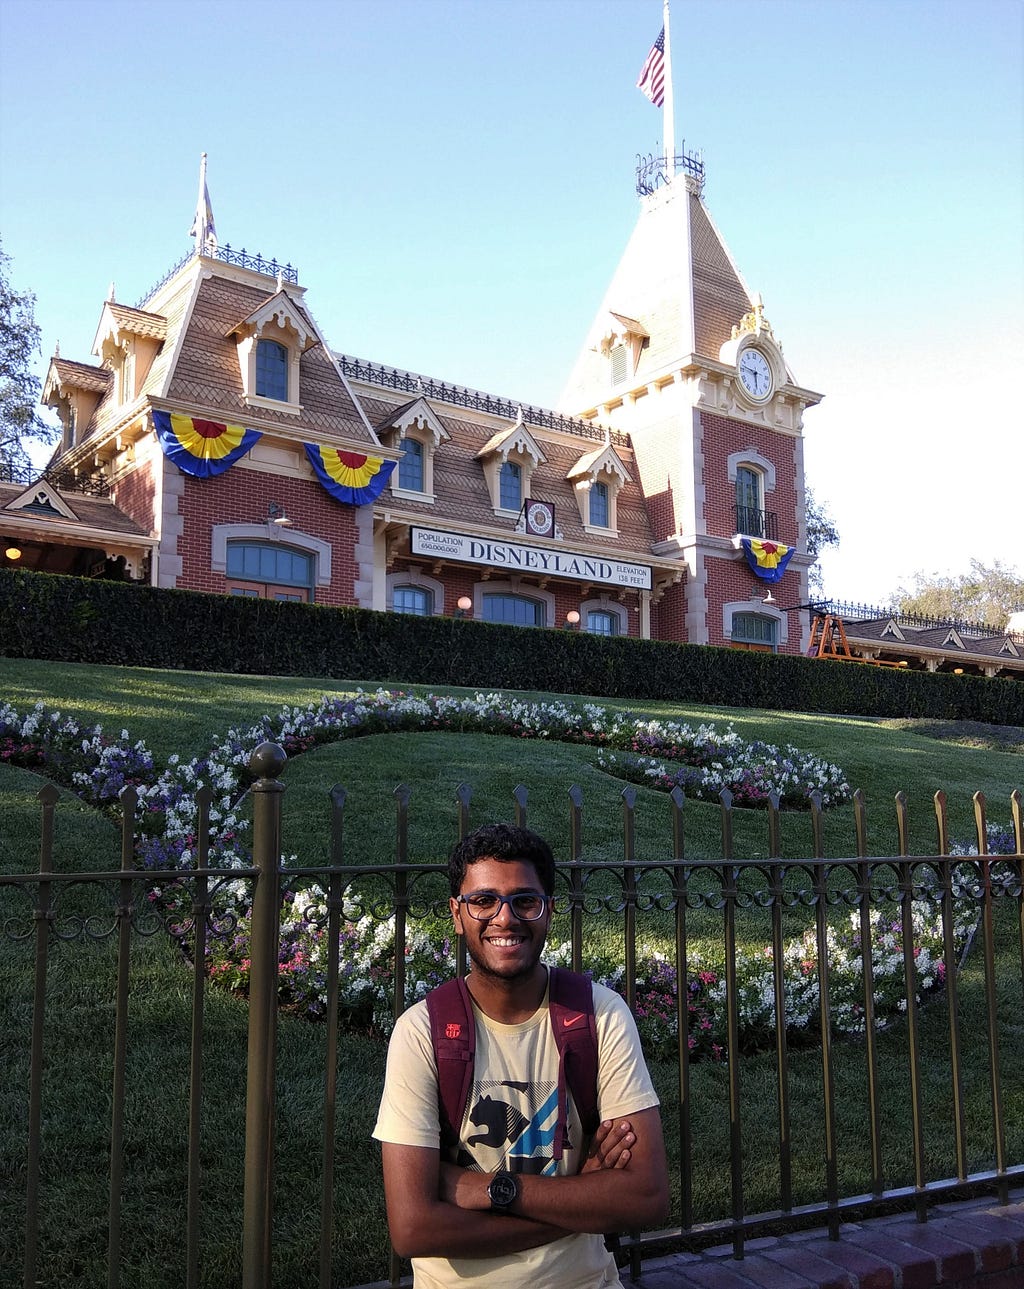 Posing in front of the Disneyland Main Station